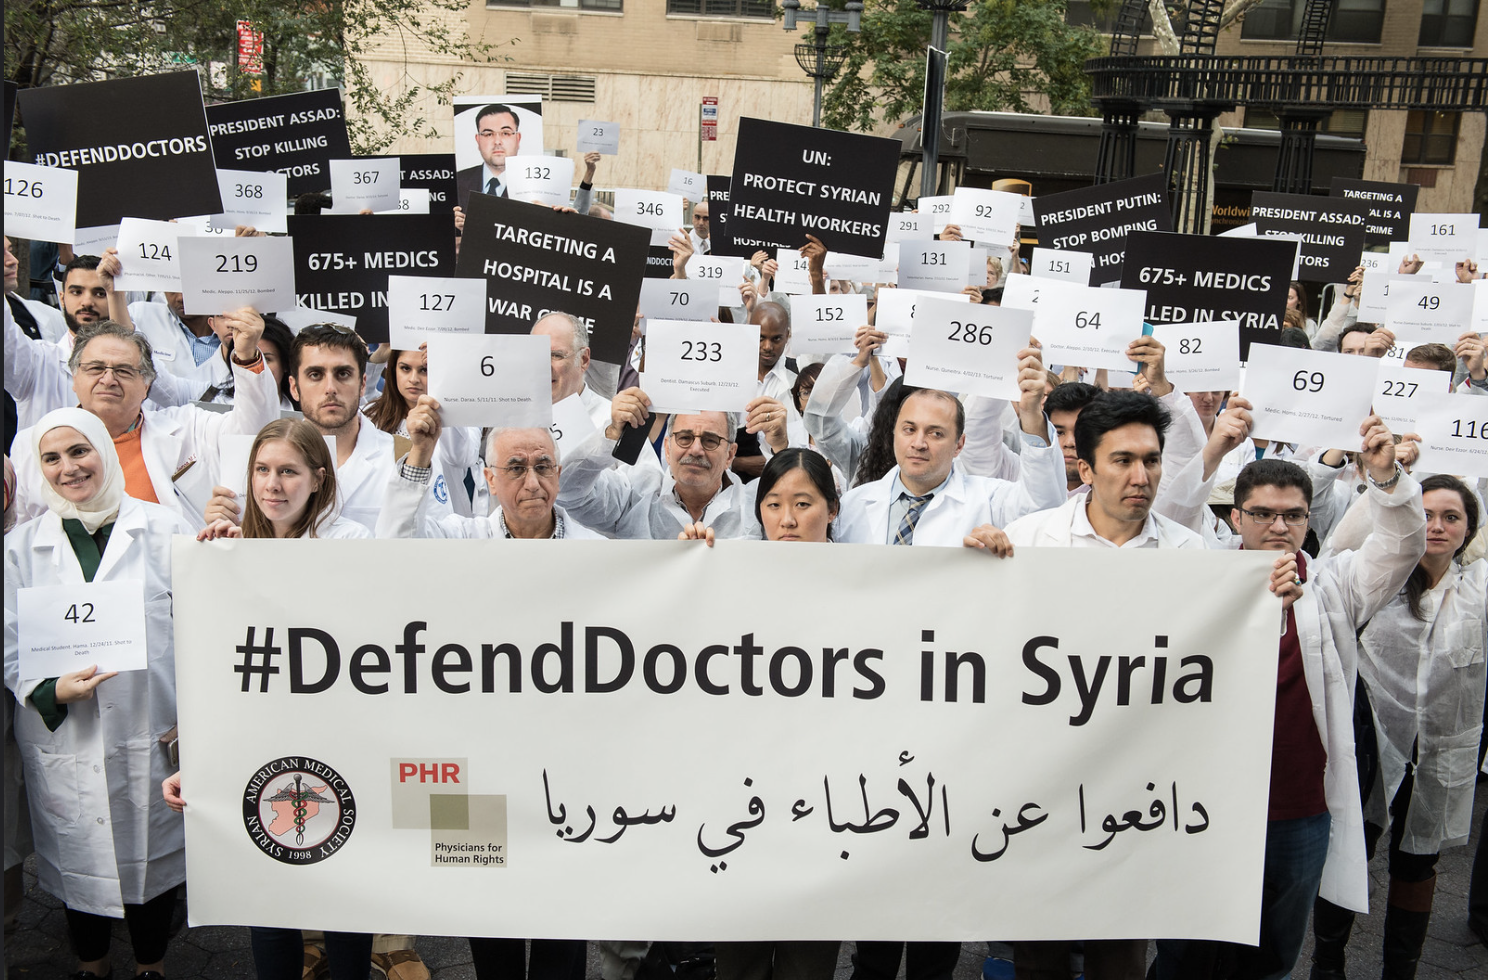 Caption: Medical personnel have been demanding protection for doctors in Syria for years, now this protection is critical to keep the deadly coronavirus from spreading. Here, supporters demand an end to the bombing of hospitals in Syria at a die-in to defend Syrian health professionals, November 4, 2015 (Photo by Michael Hnatov courtesy Physicians for Human Rights) Creative Commons license via Flickr